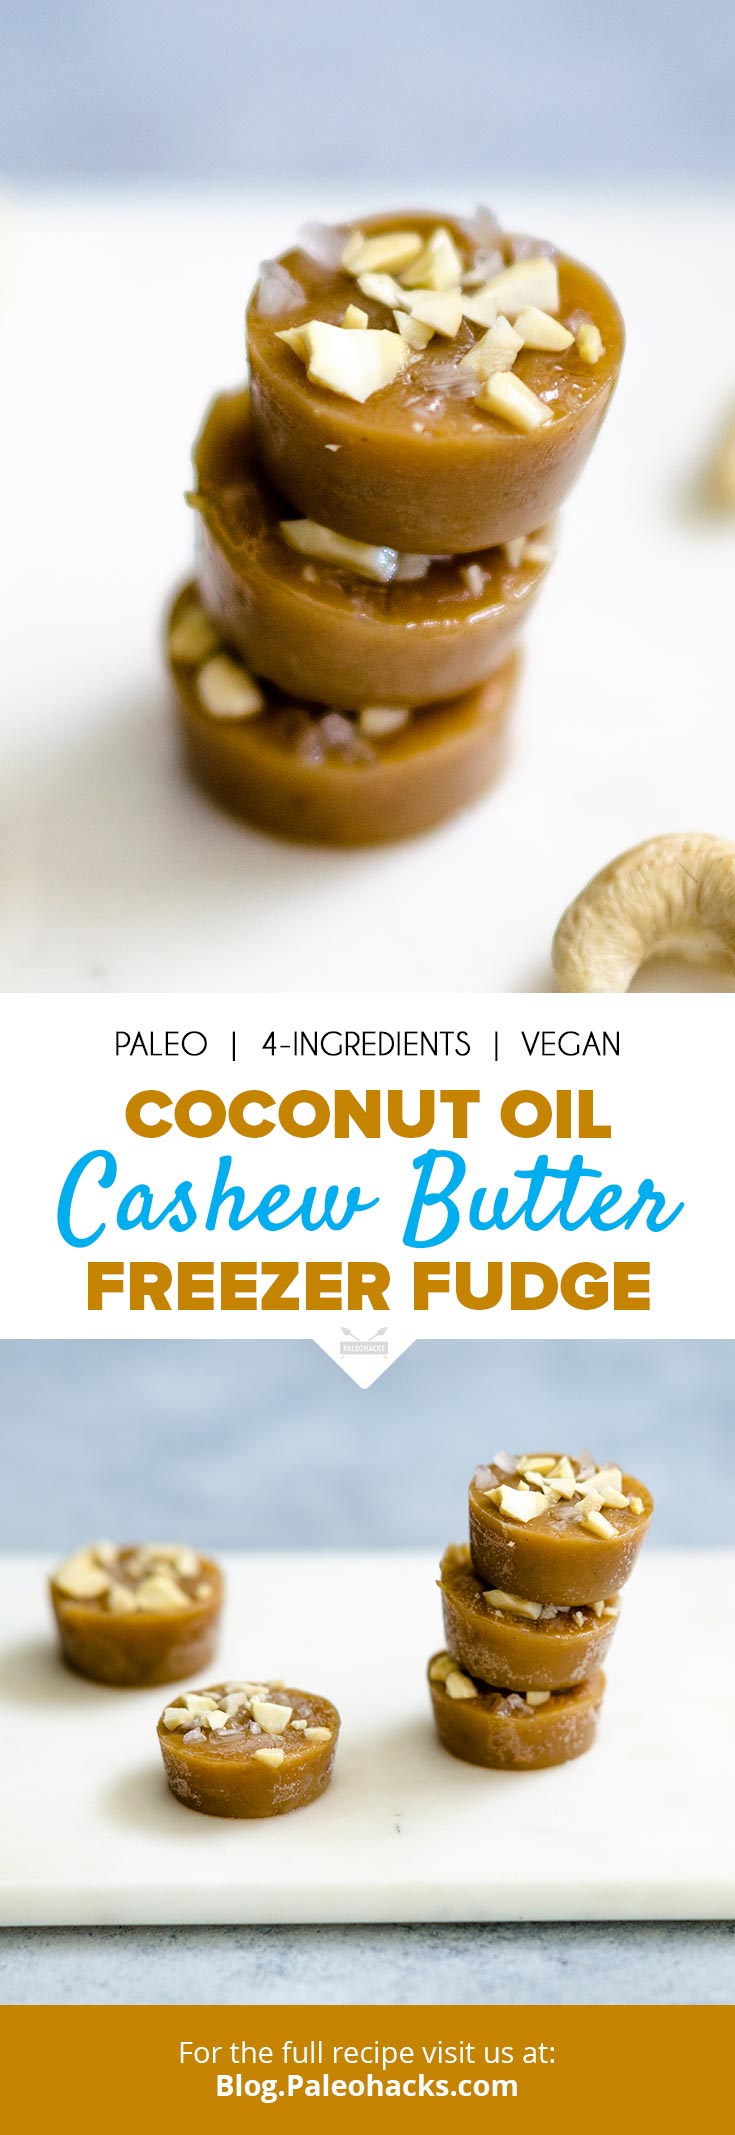 Chewy, creamy and entirely Paleo-friendly, this salted cashew butter fudge is about to be the best thing in your freezer.